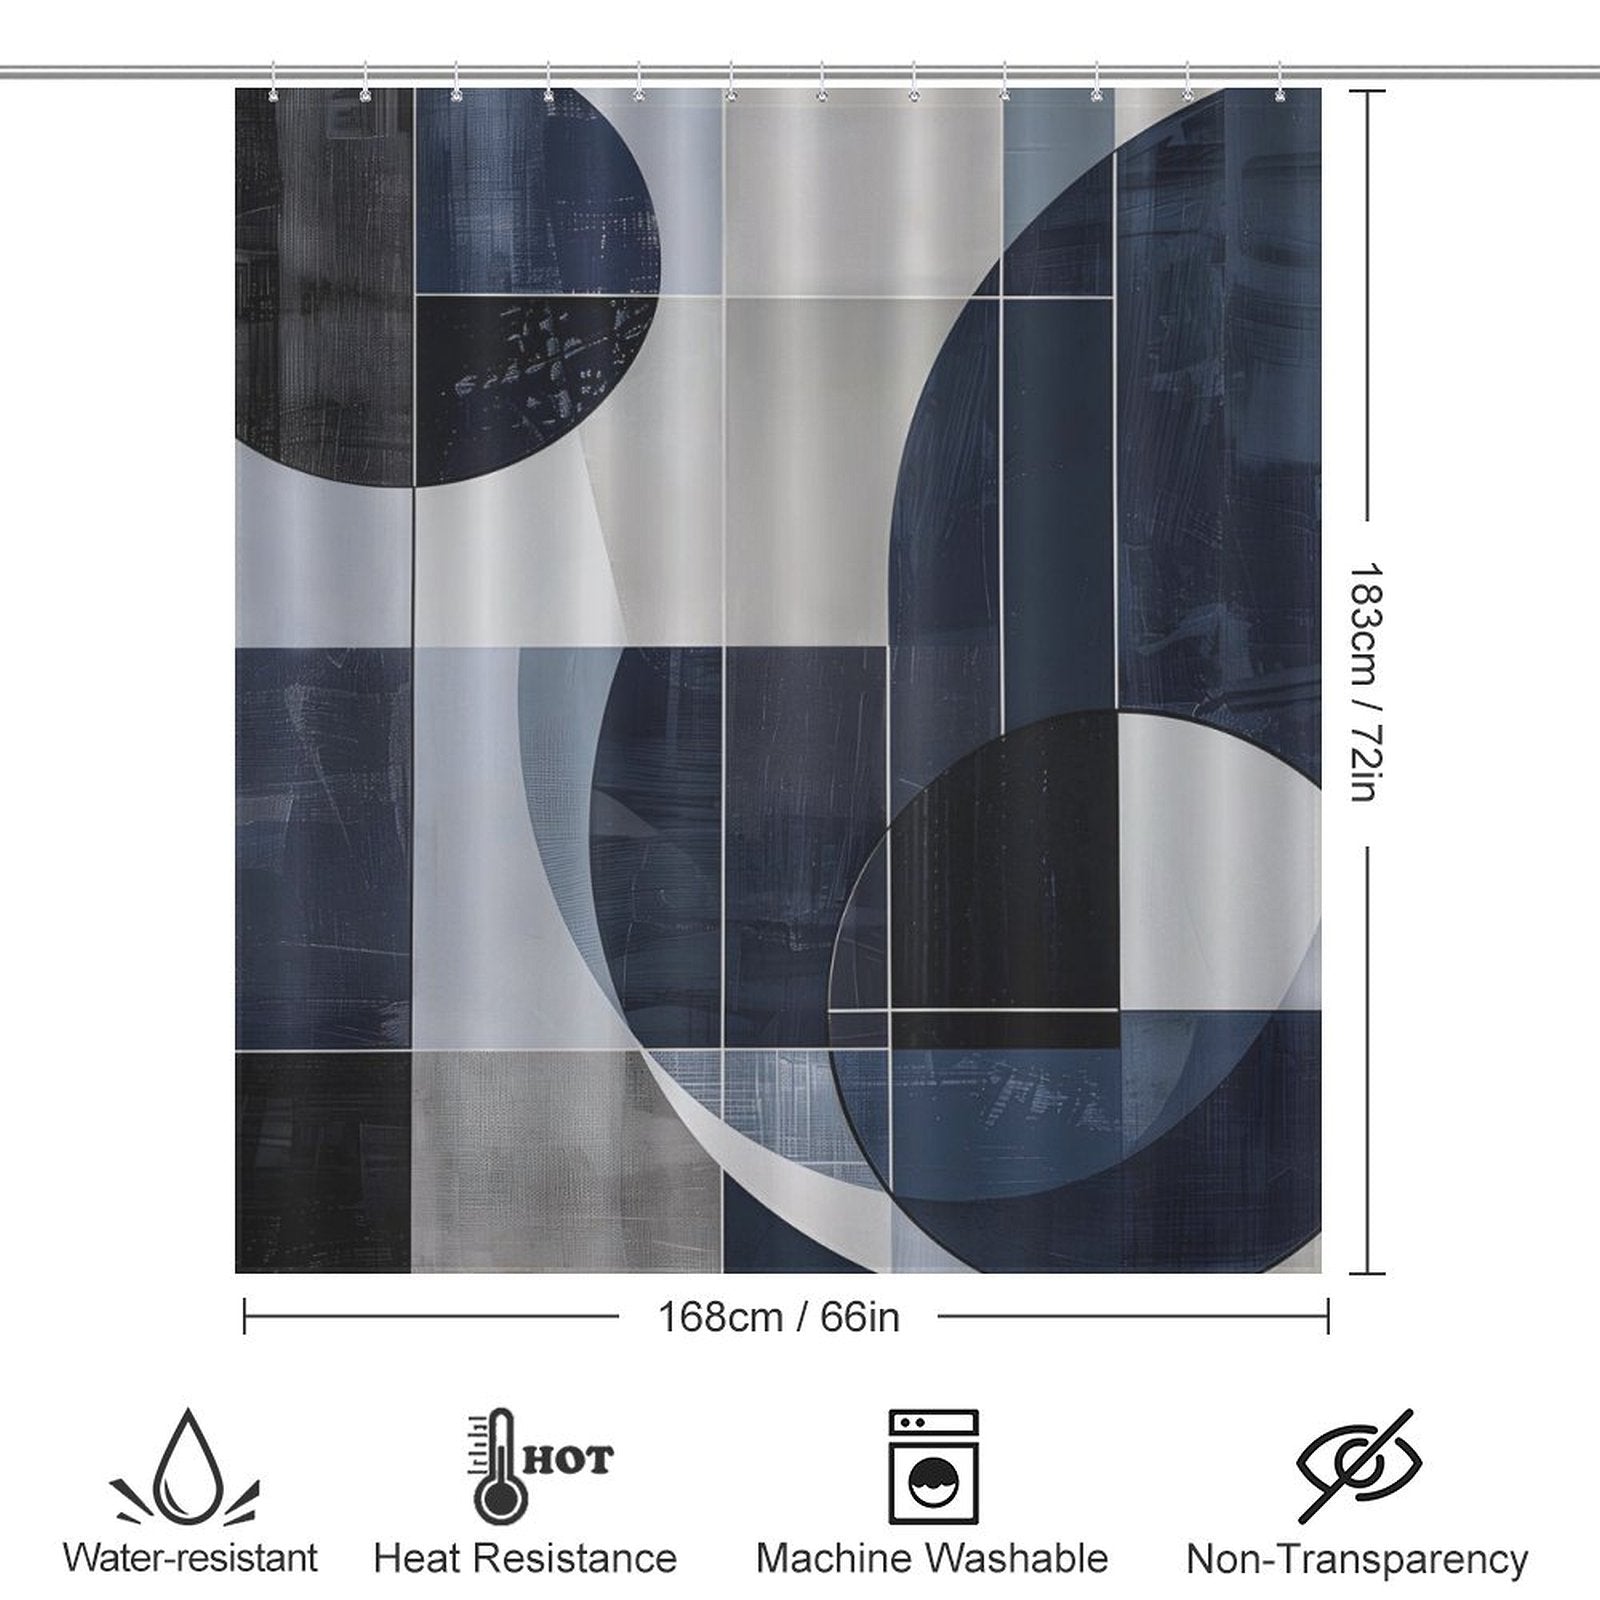 Shower curtain with an abstract geometric design in deep blue and gray tones, inspired by mid-century modern aesthetics. Dimensions: 183 cm (72 in) high, 168 cm (66 in) wide. Features: water-resistant, heat-resistant, machine washable, non-transparent.

Product Name: Geometric Deep Blue Abstract Art Mid-Century Modern Style Shower Curtain-Cottoncat
Brand Name: Cotton Cat